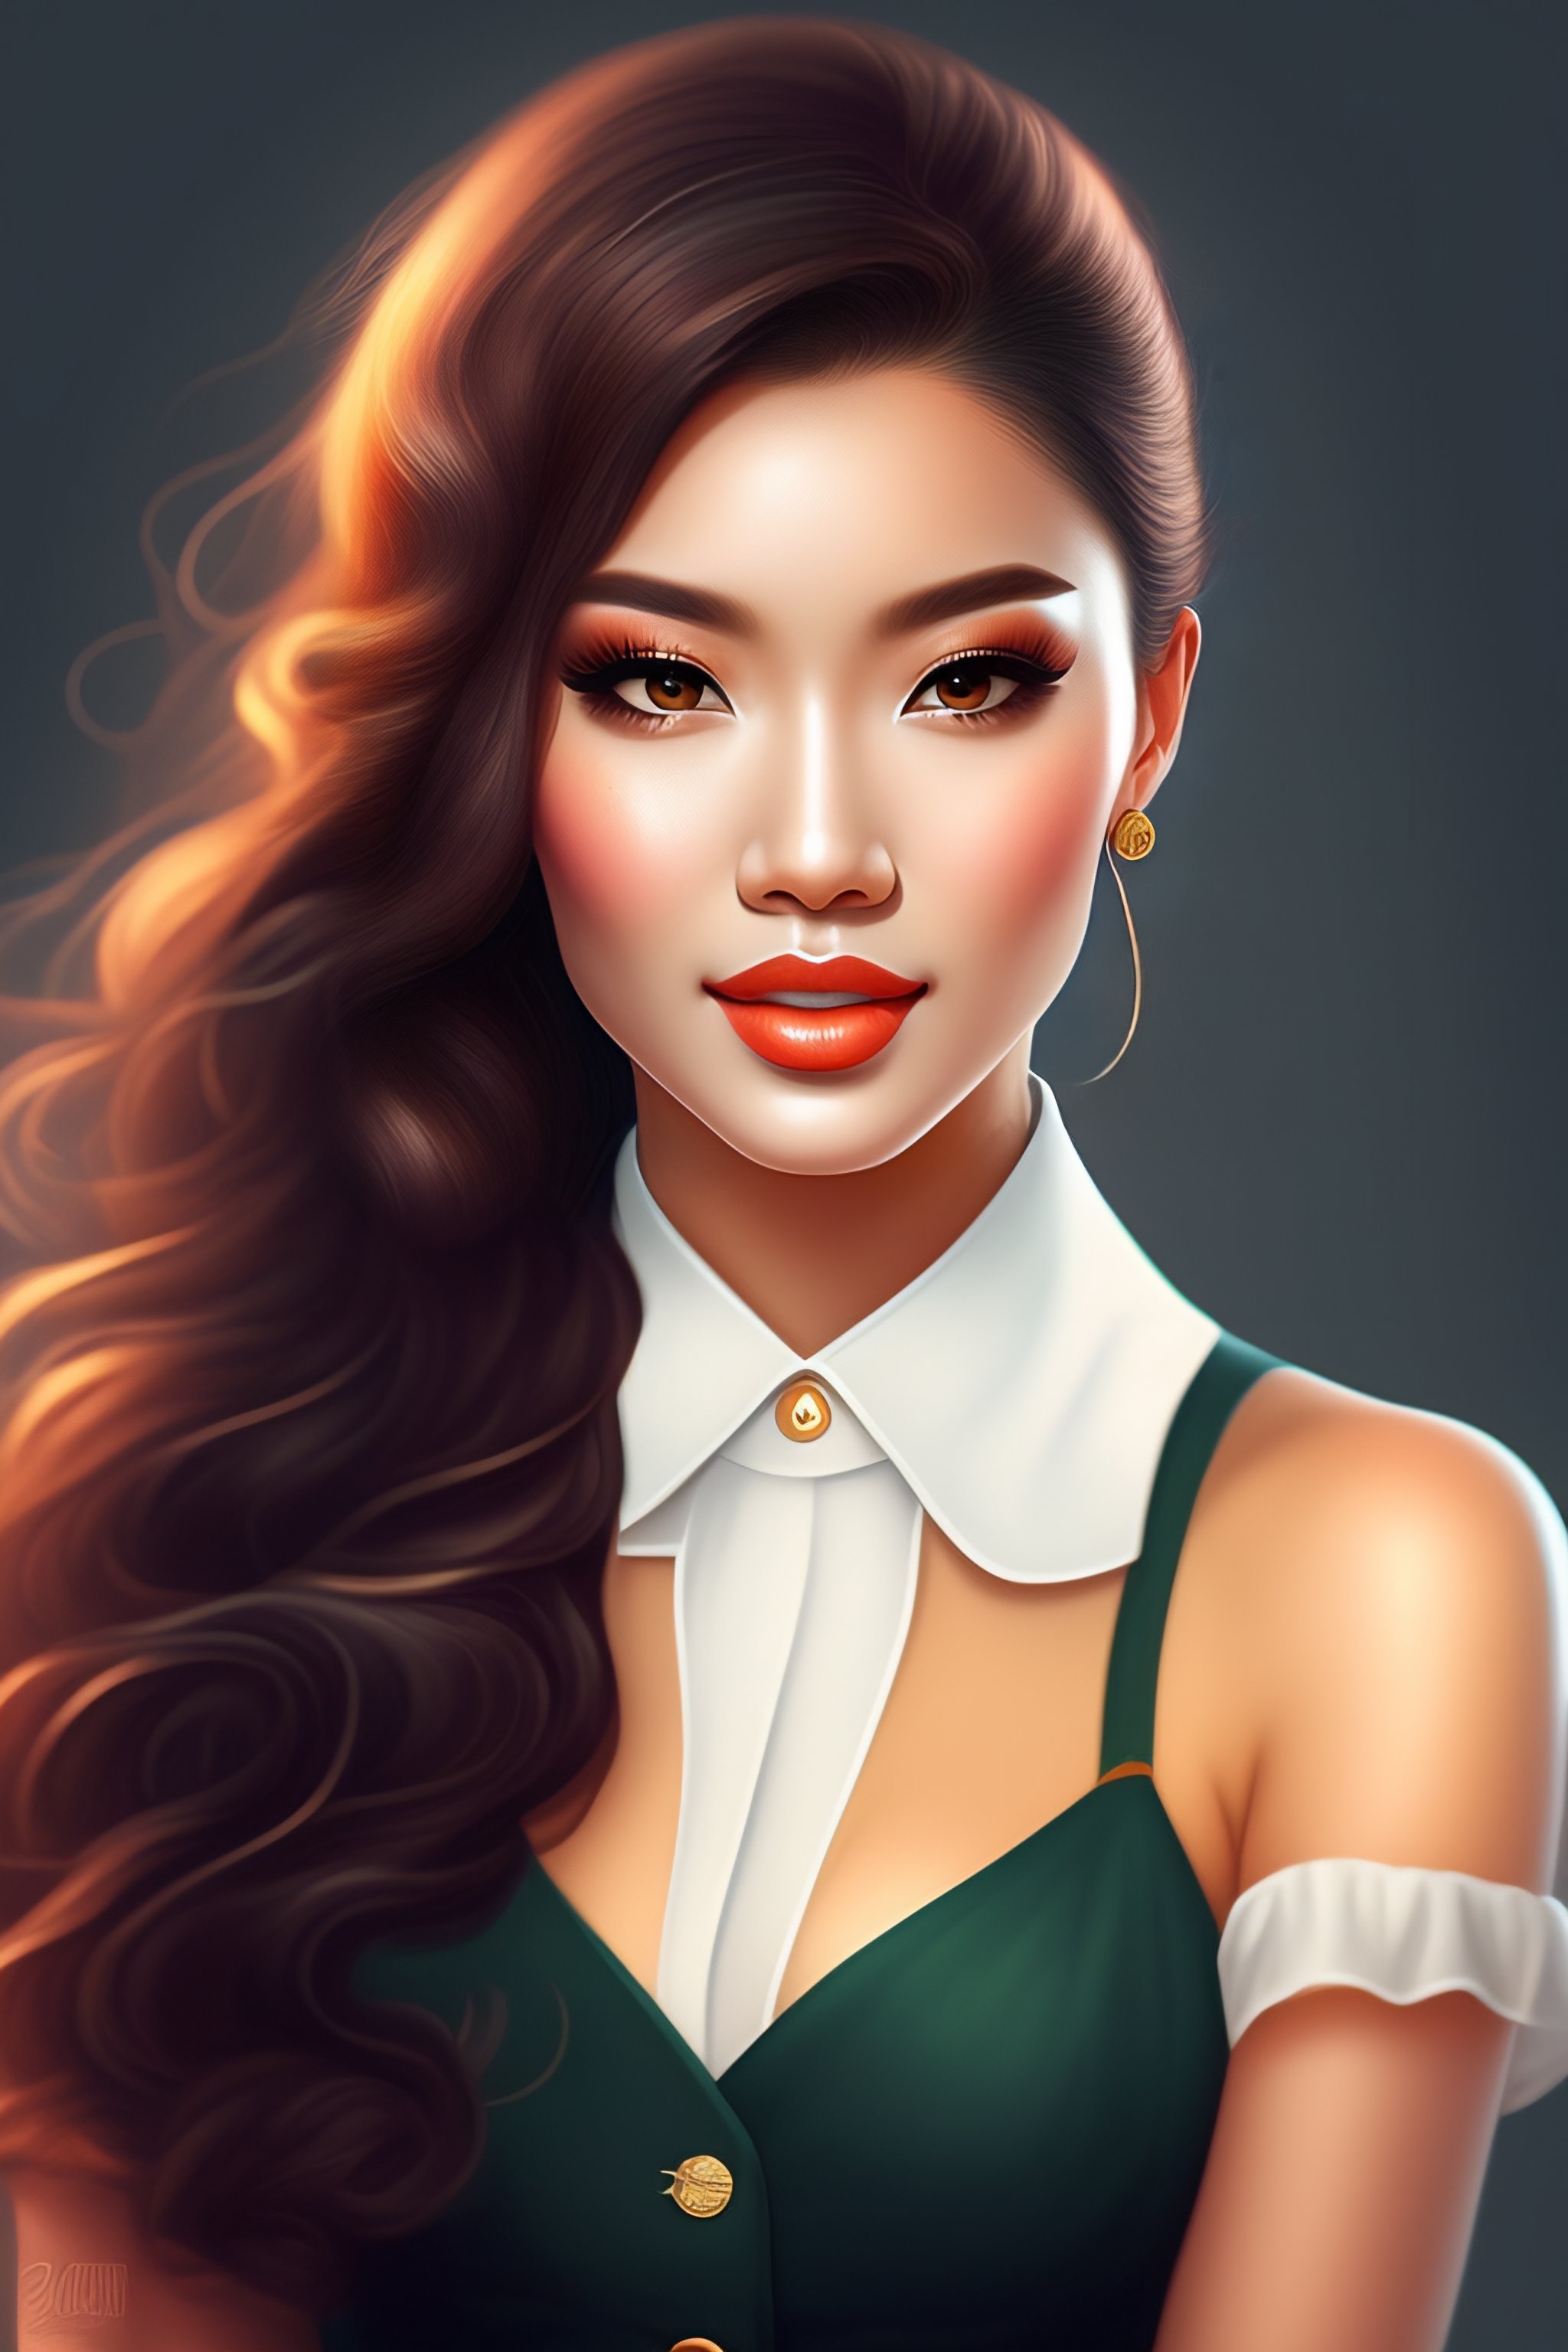 Lexica - Drawin of Elegant girl in urban outfit, cute fine face ...